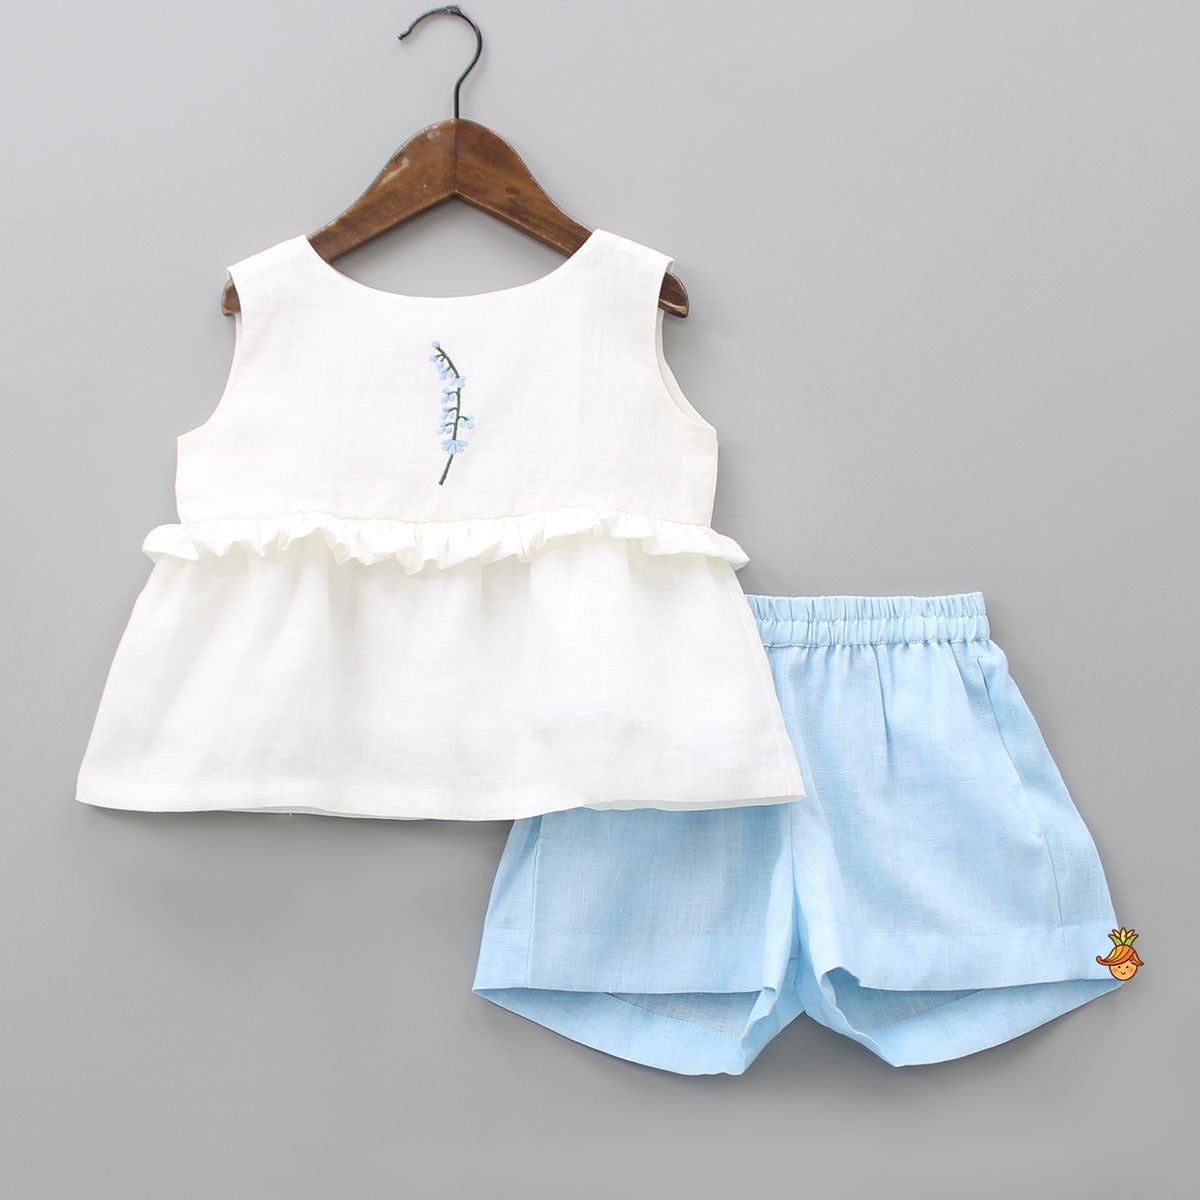 Mini Flower Embroidered Top And Dual Pockets Blue Shorts